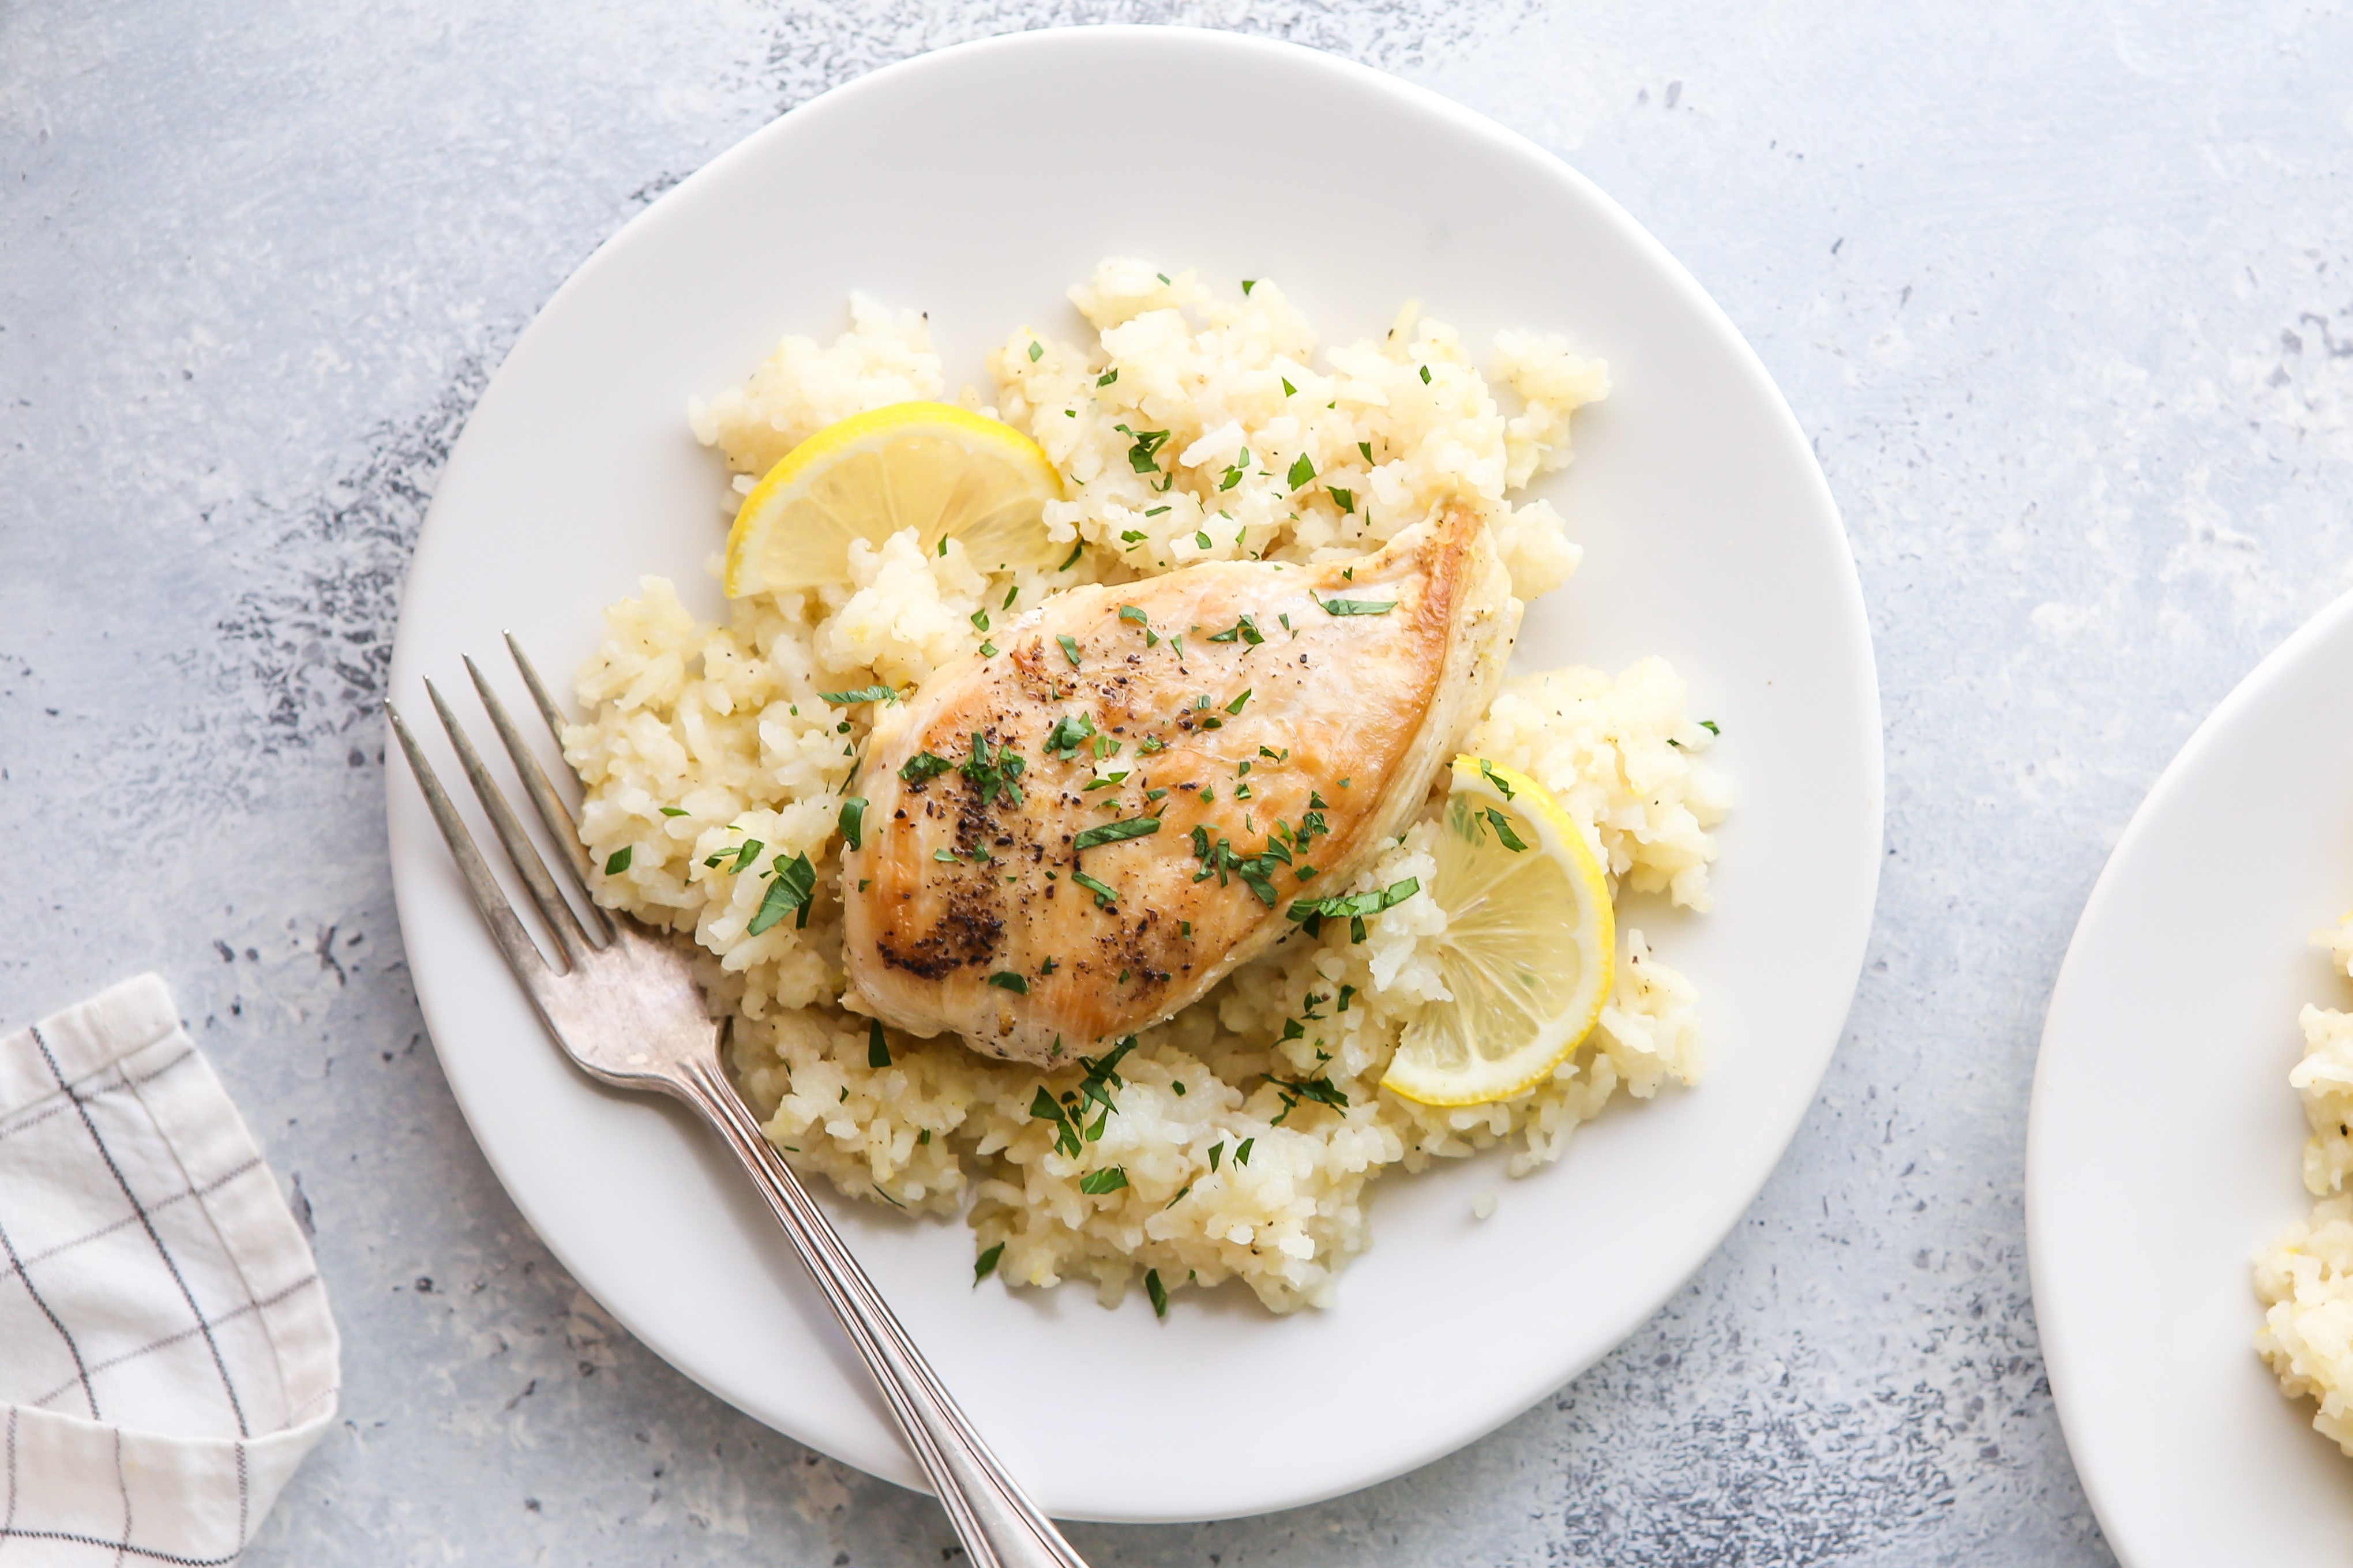 Slow cooker Lemon Chicken and Rice